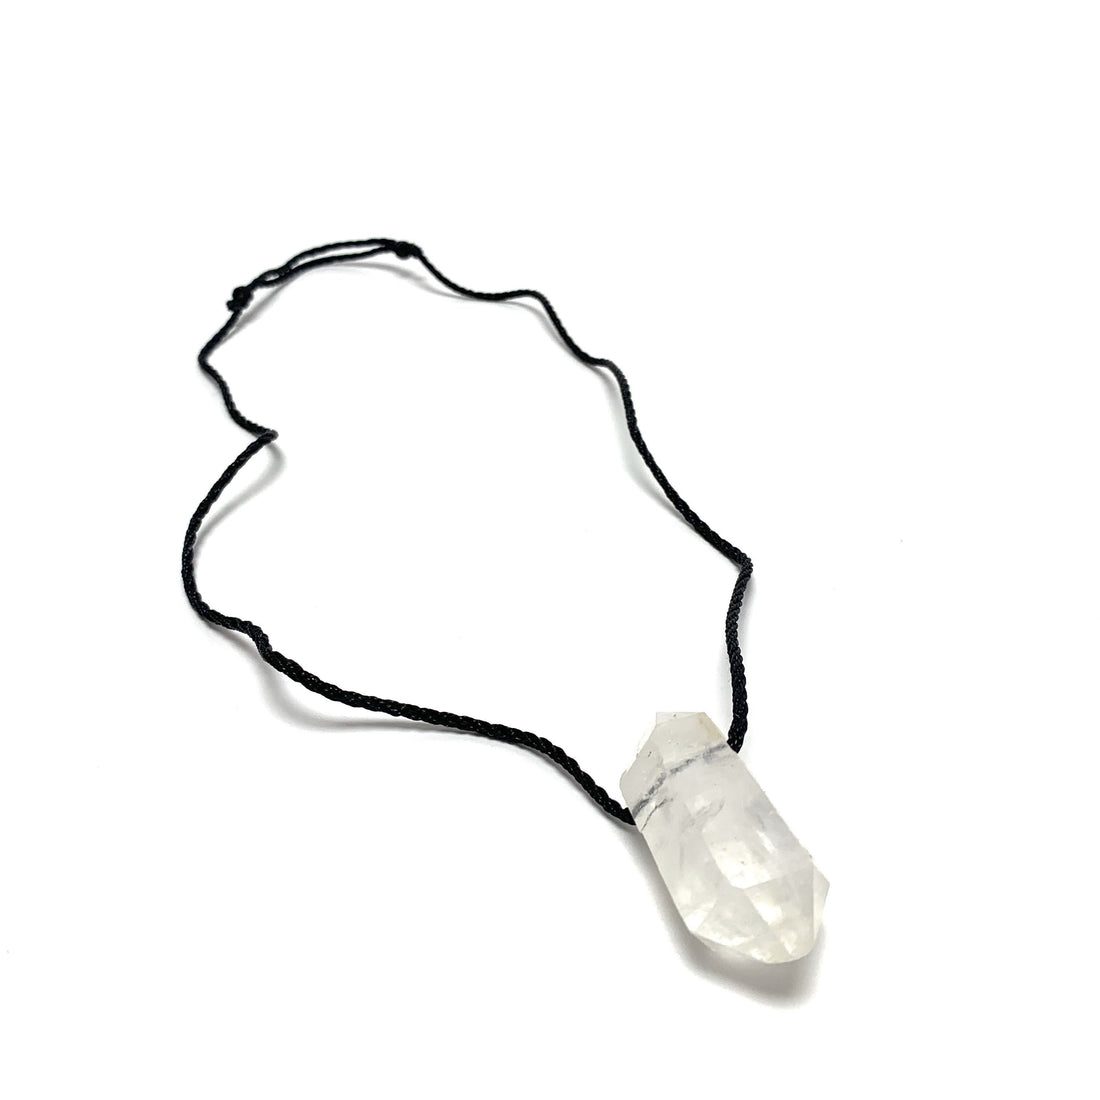 Clear Quartz Nylon Cord Necklace Necklaces Crystals B. $18.00 Raw Point 